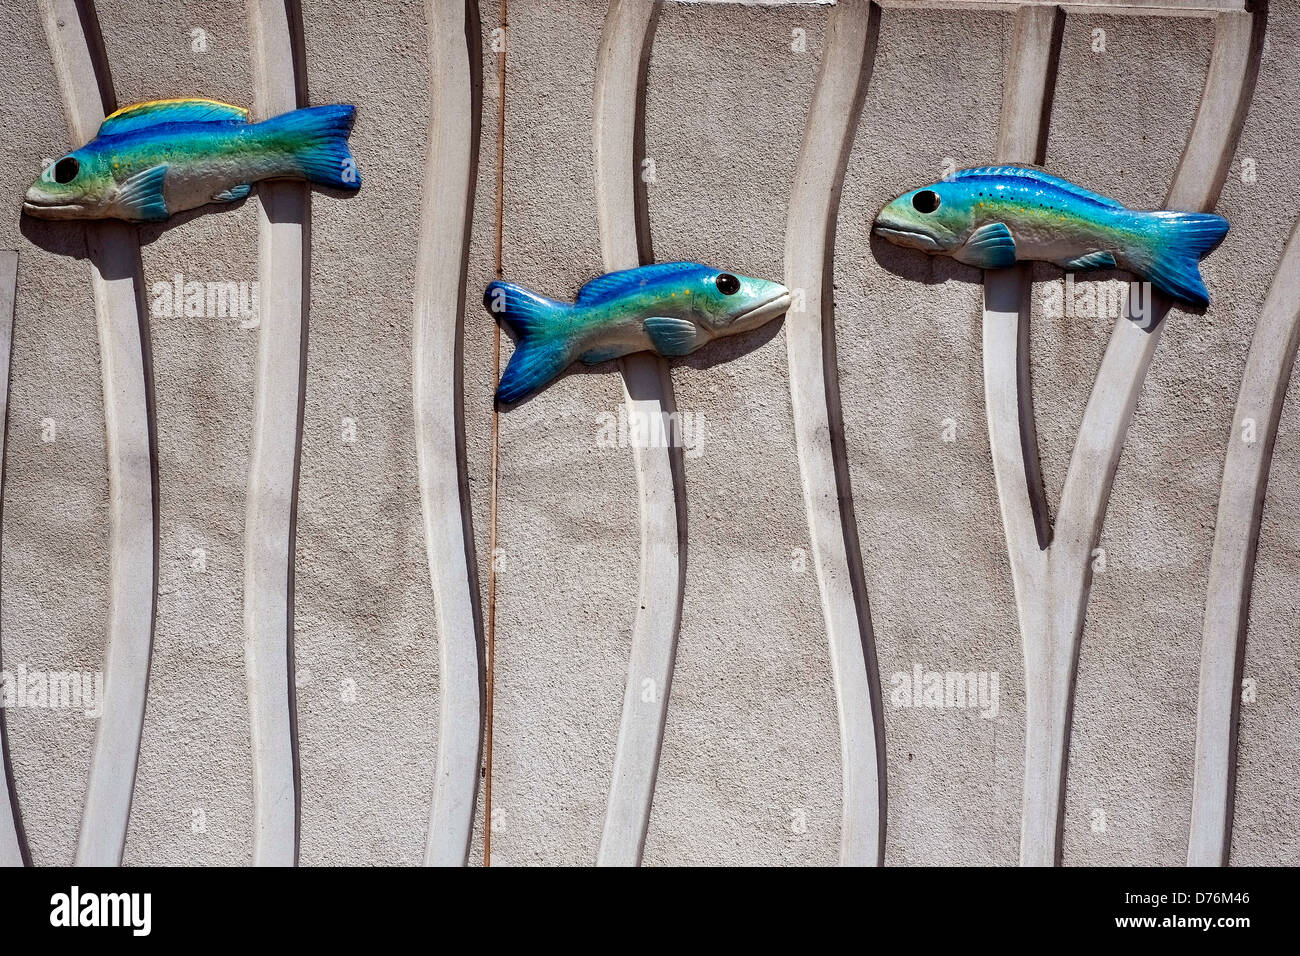 Fish sculptures on the exterior wall of the New York Aquarium on the boardwalk at Coney Island, Brooklyn, New York. Stock Photo